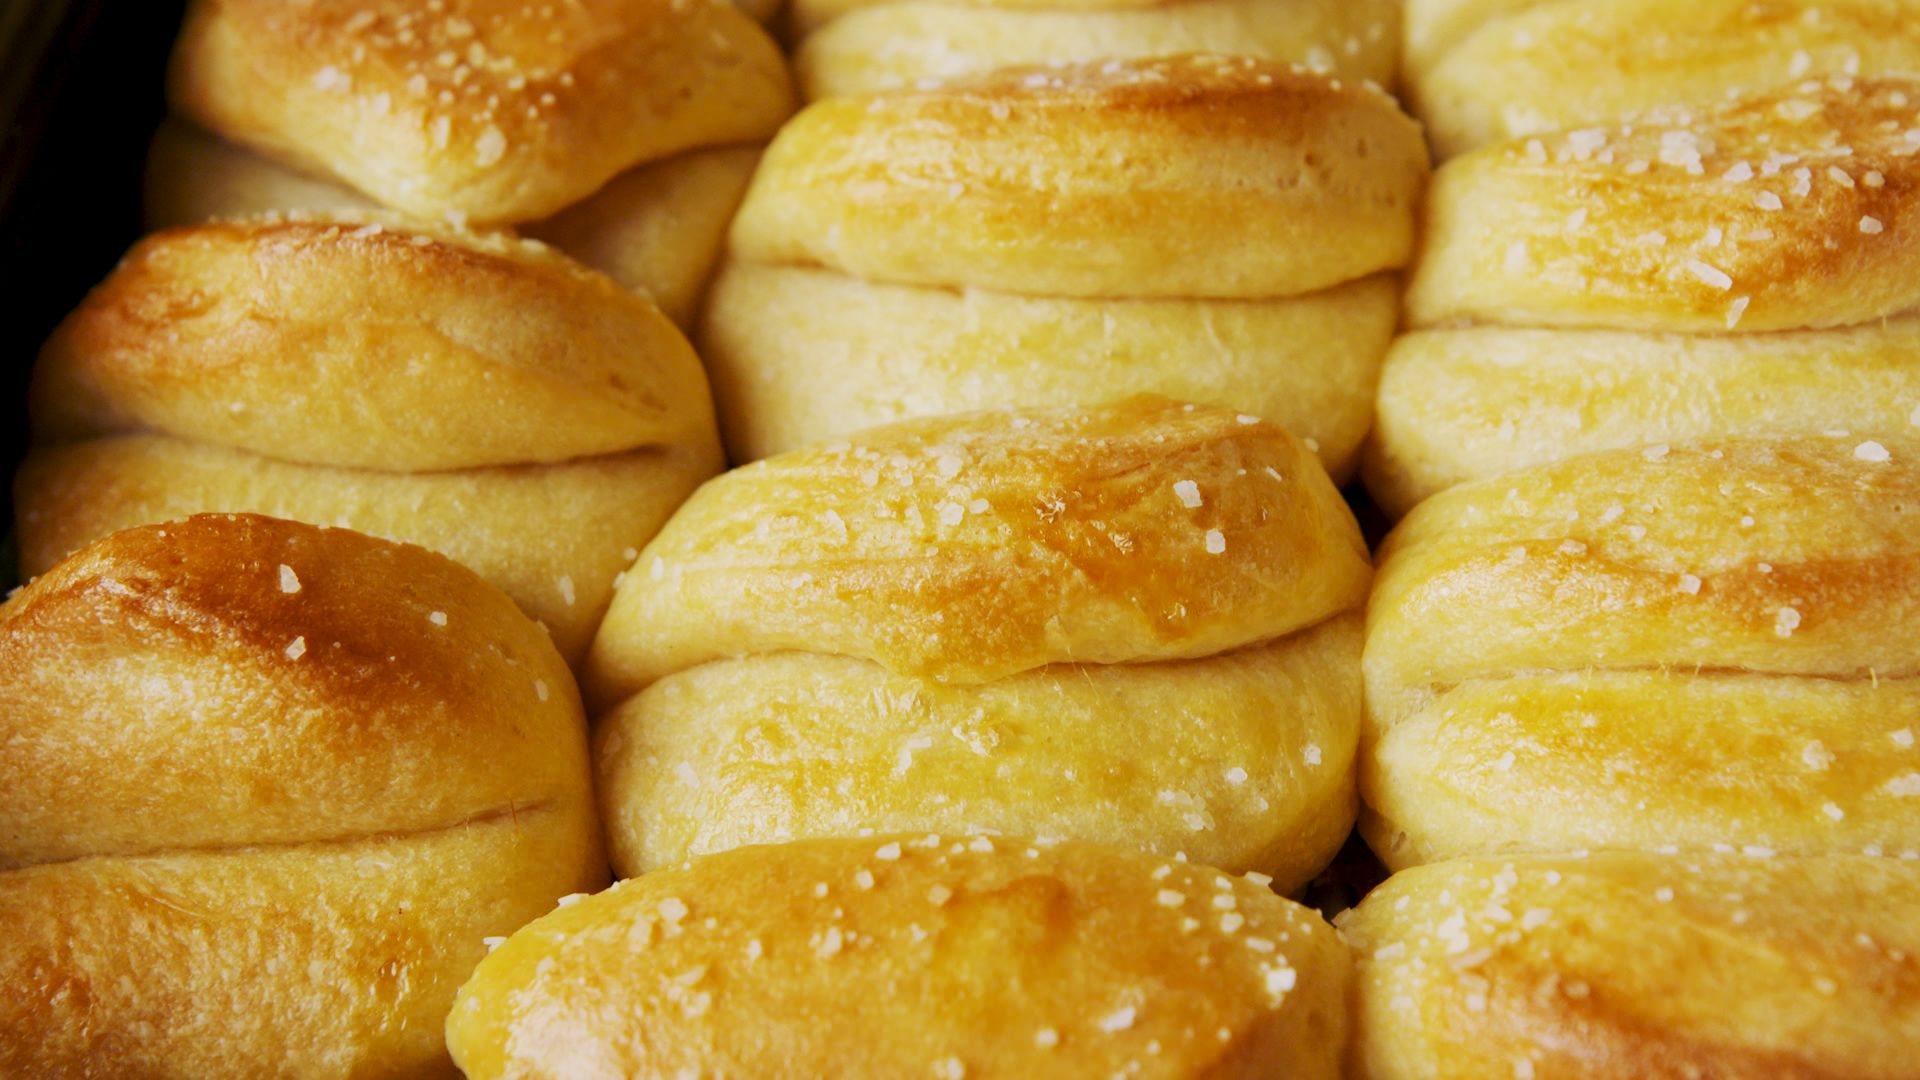 Parker House Rolls With Black Pepper and Demerara Sugar Recipe - NYT Cooking